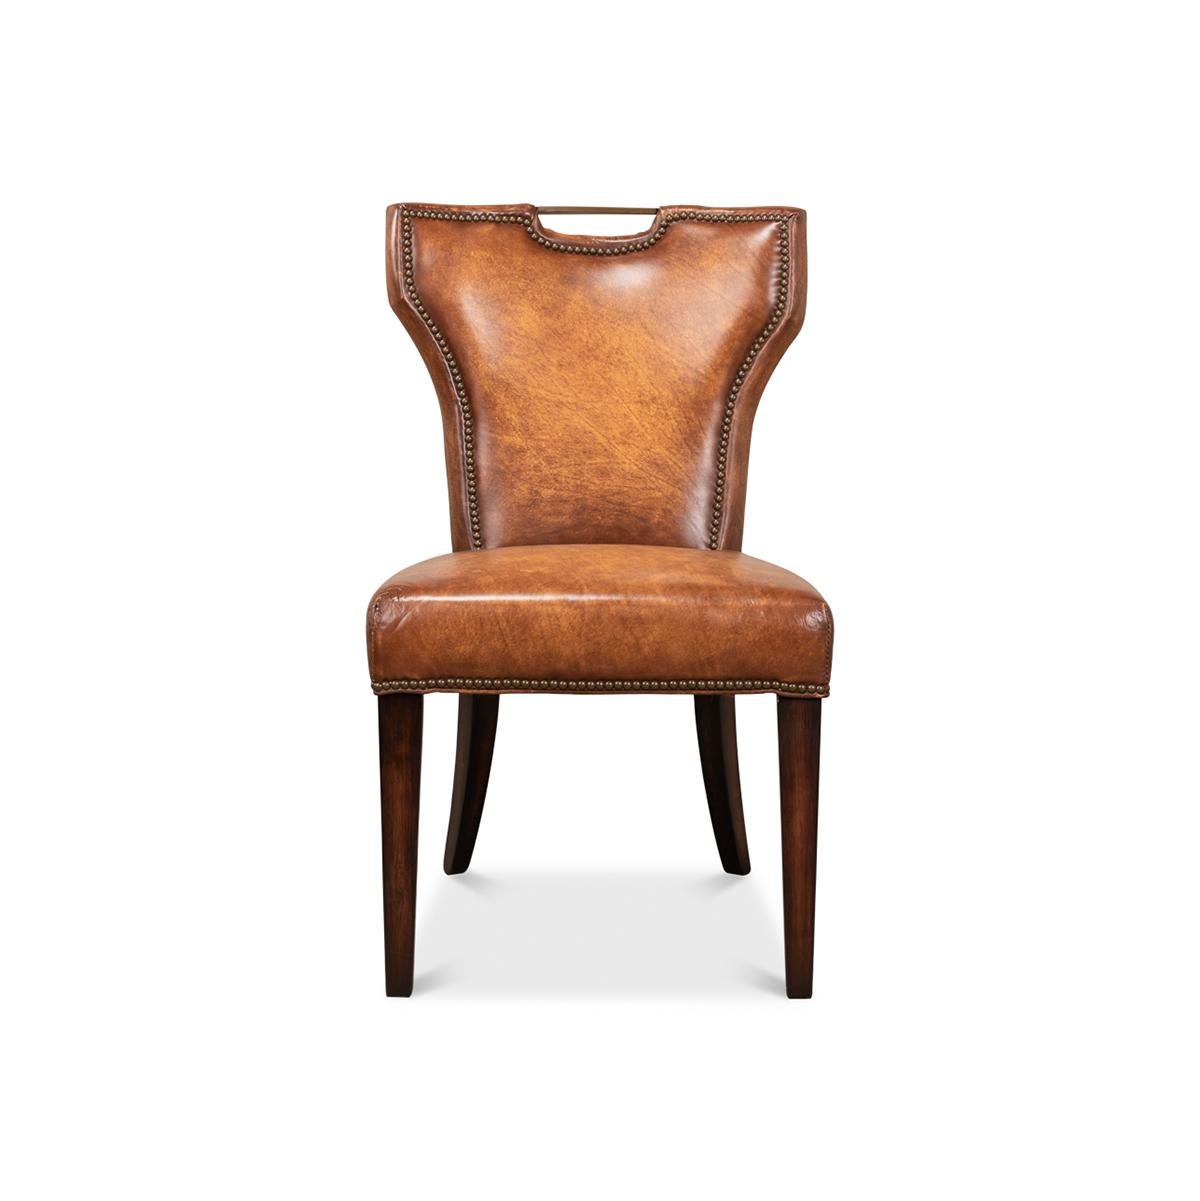 A masterpiece that brings a touch of elegance and sophistication to your dining experience. This chair is a harmonious blend of classic design and modern craftsmanship, featuring a backrest with an exquisite, cut-out handle detail, allowing for easy